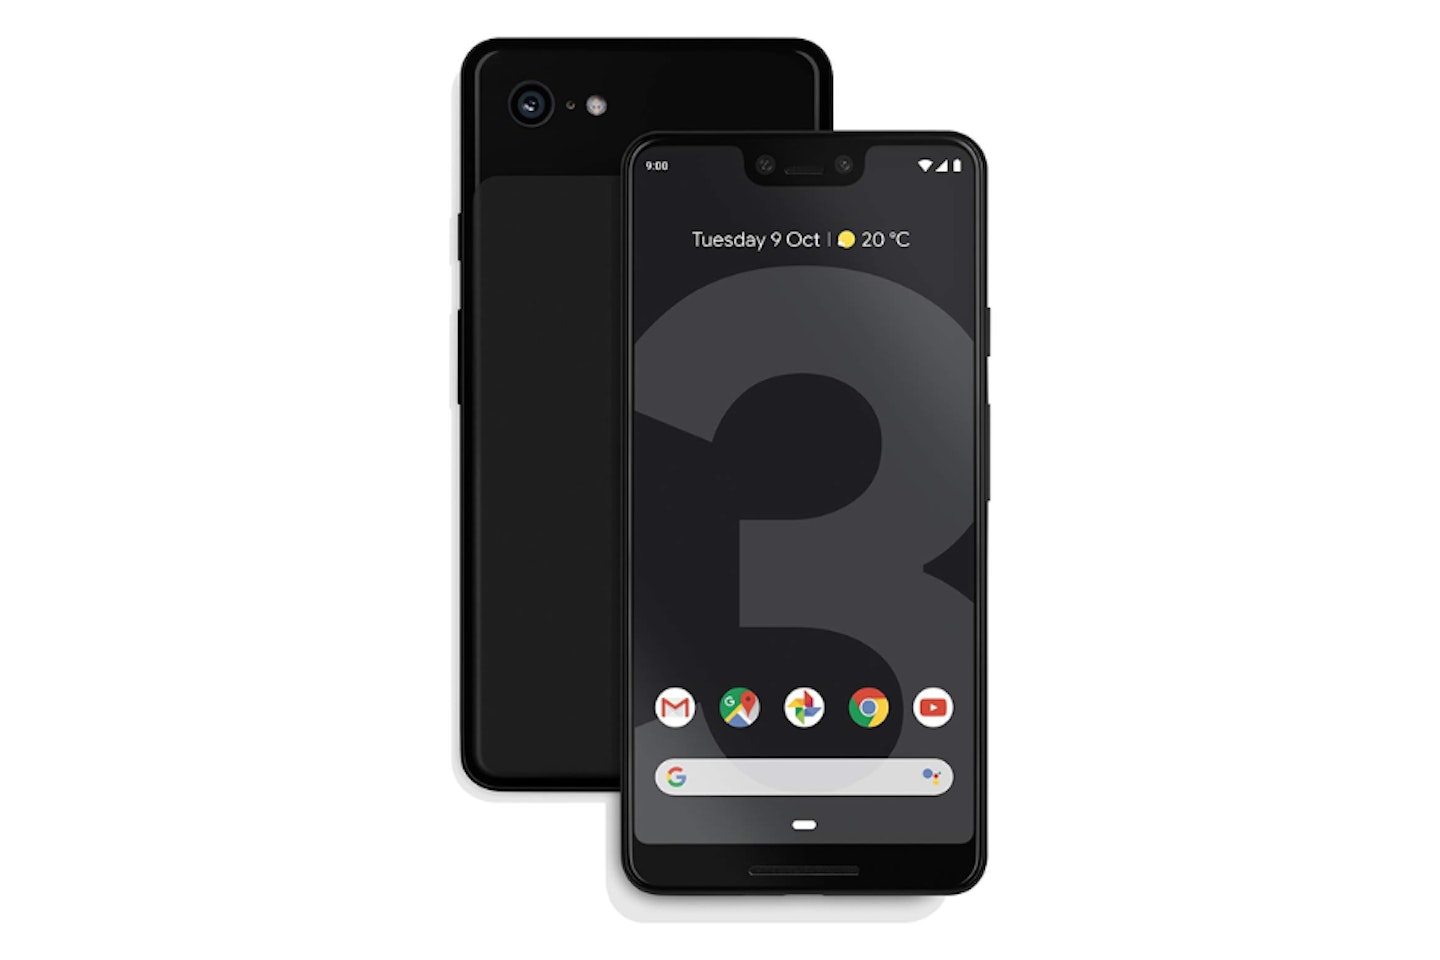 Google Pixel 3 - one of the best smartphones for photography